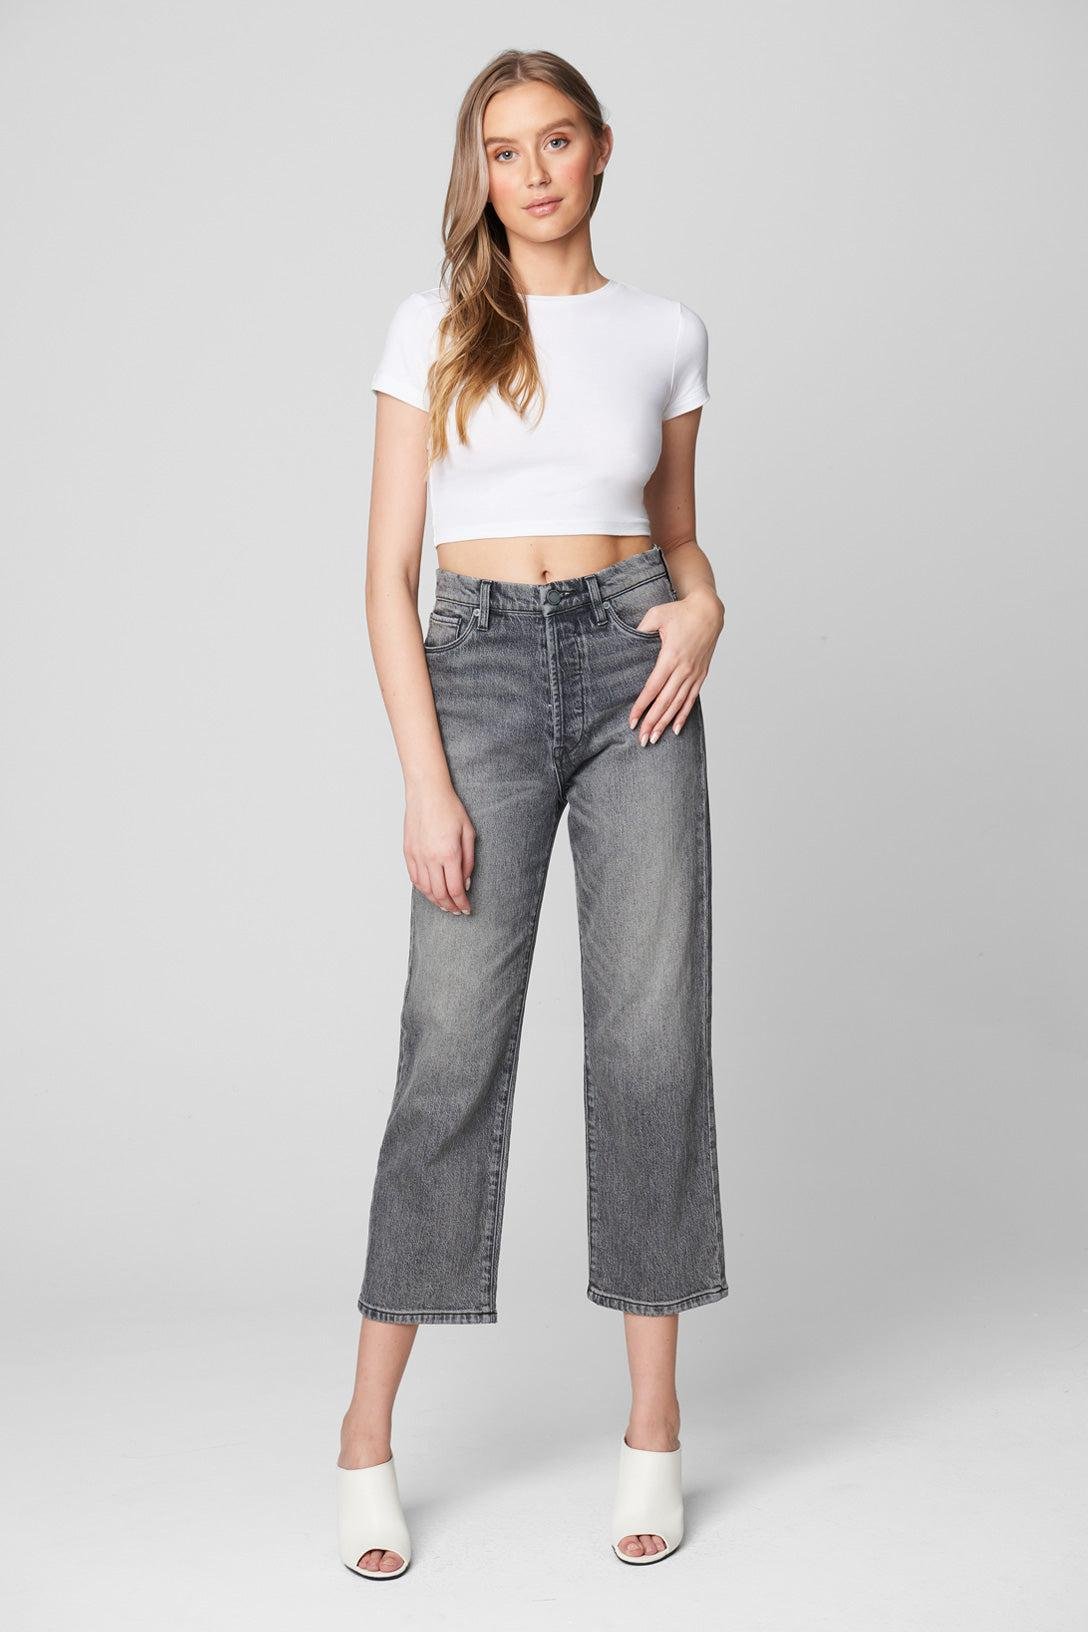 Blank NYC The Baxter Jeans by BLANK NYC